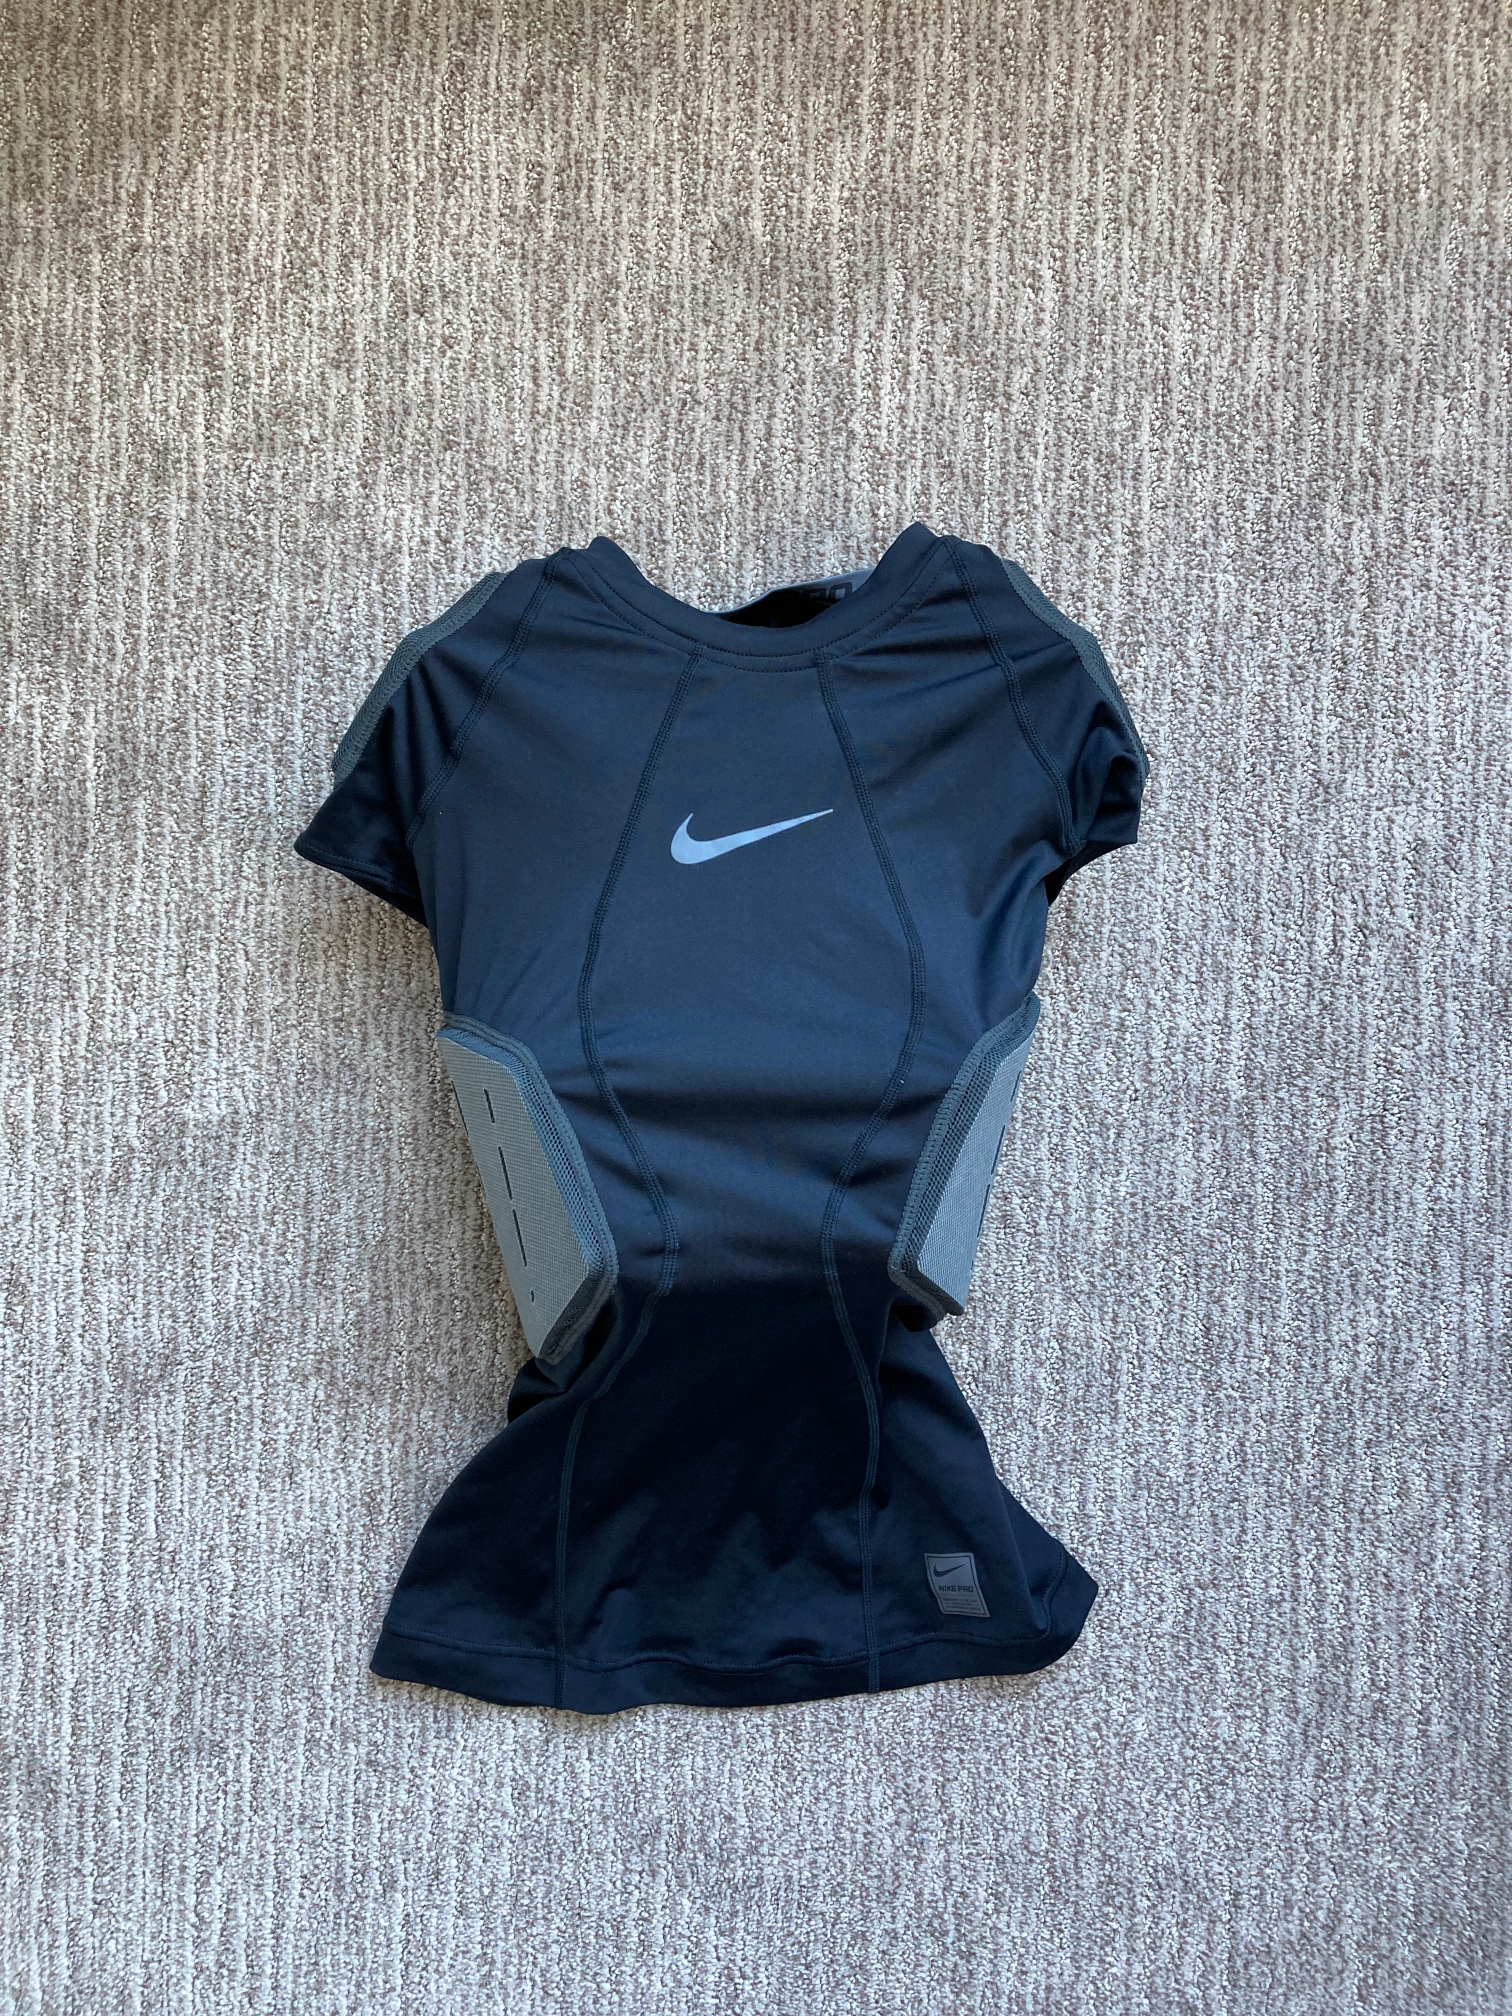 Nike Mens Pro Combat Hyperstrong Football Padded Compression